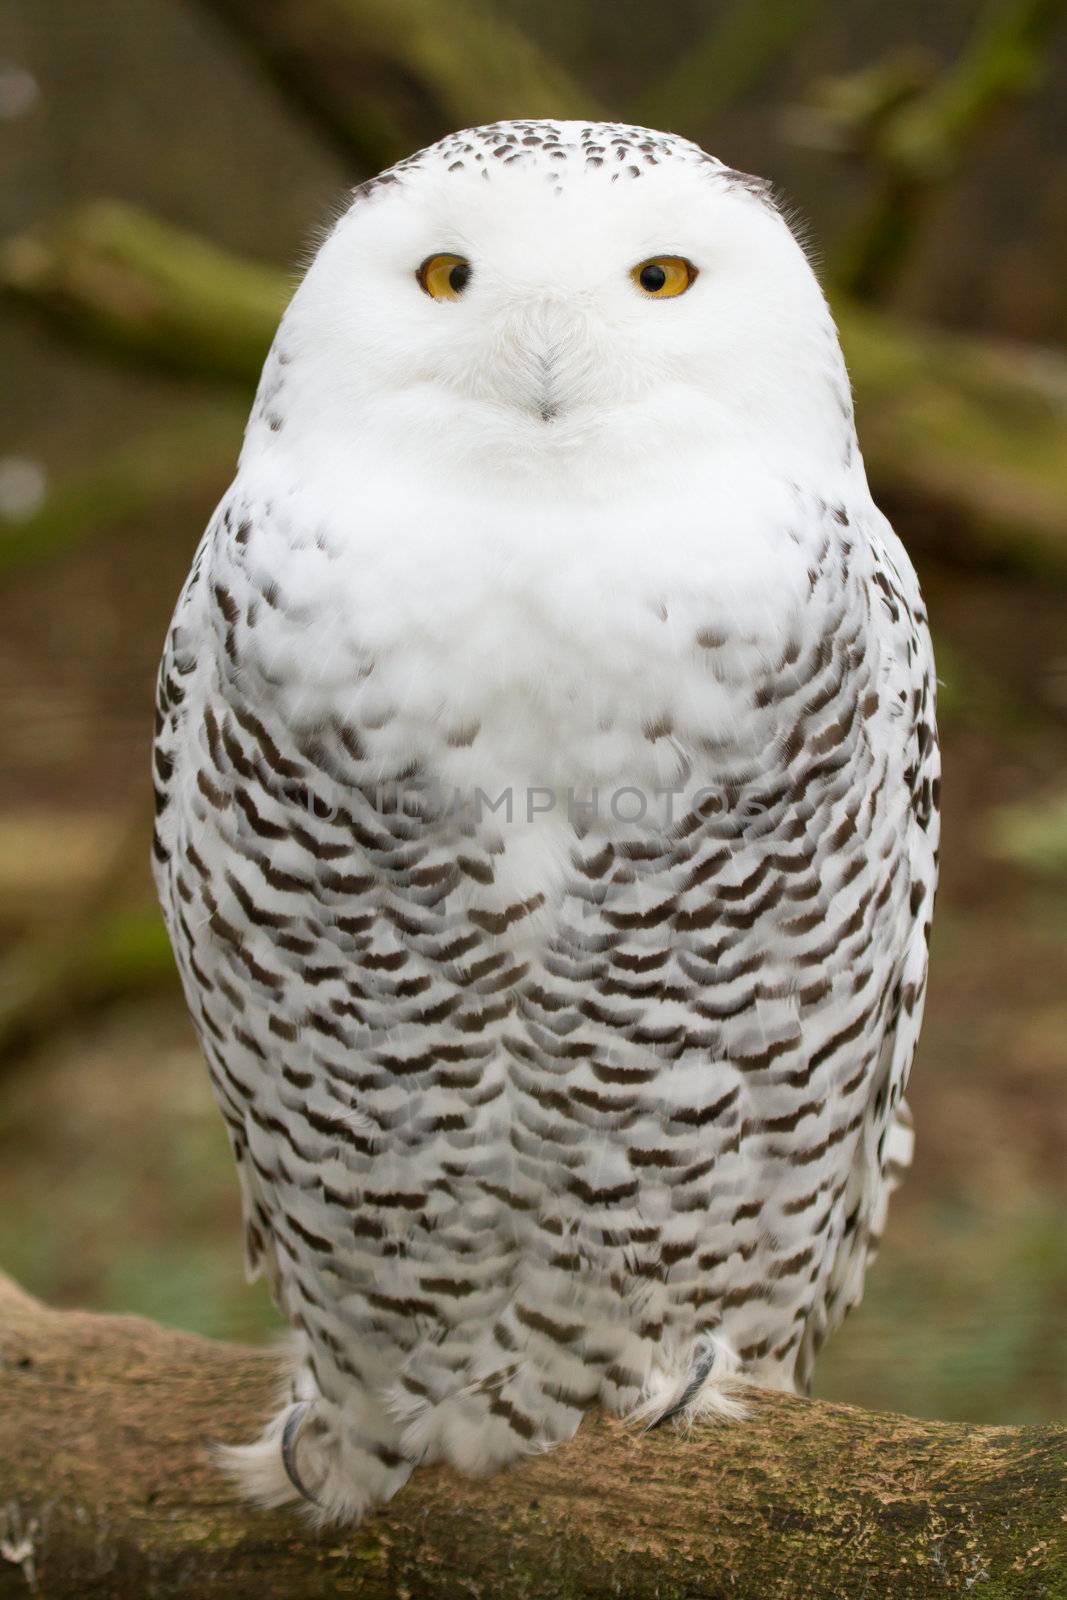 A snow owl by michaklootwijk